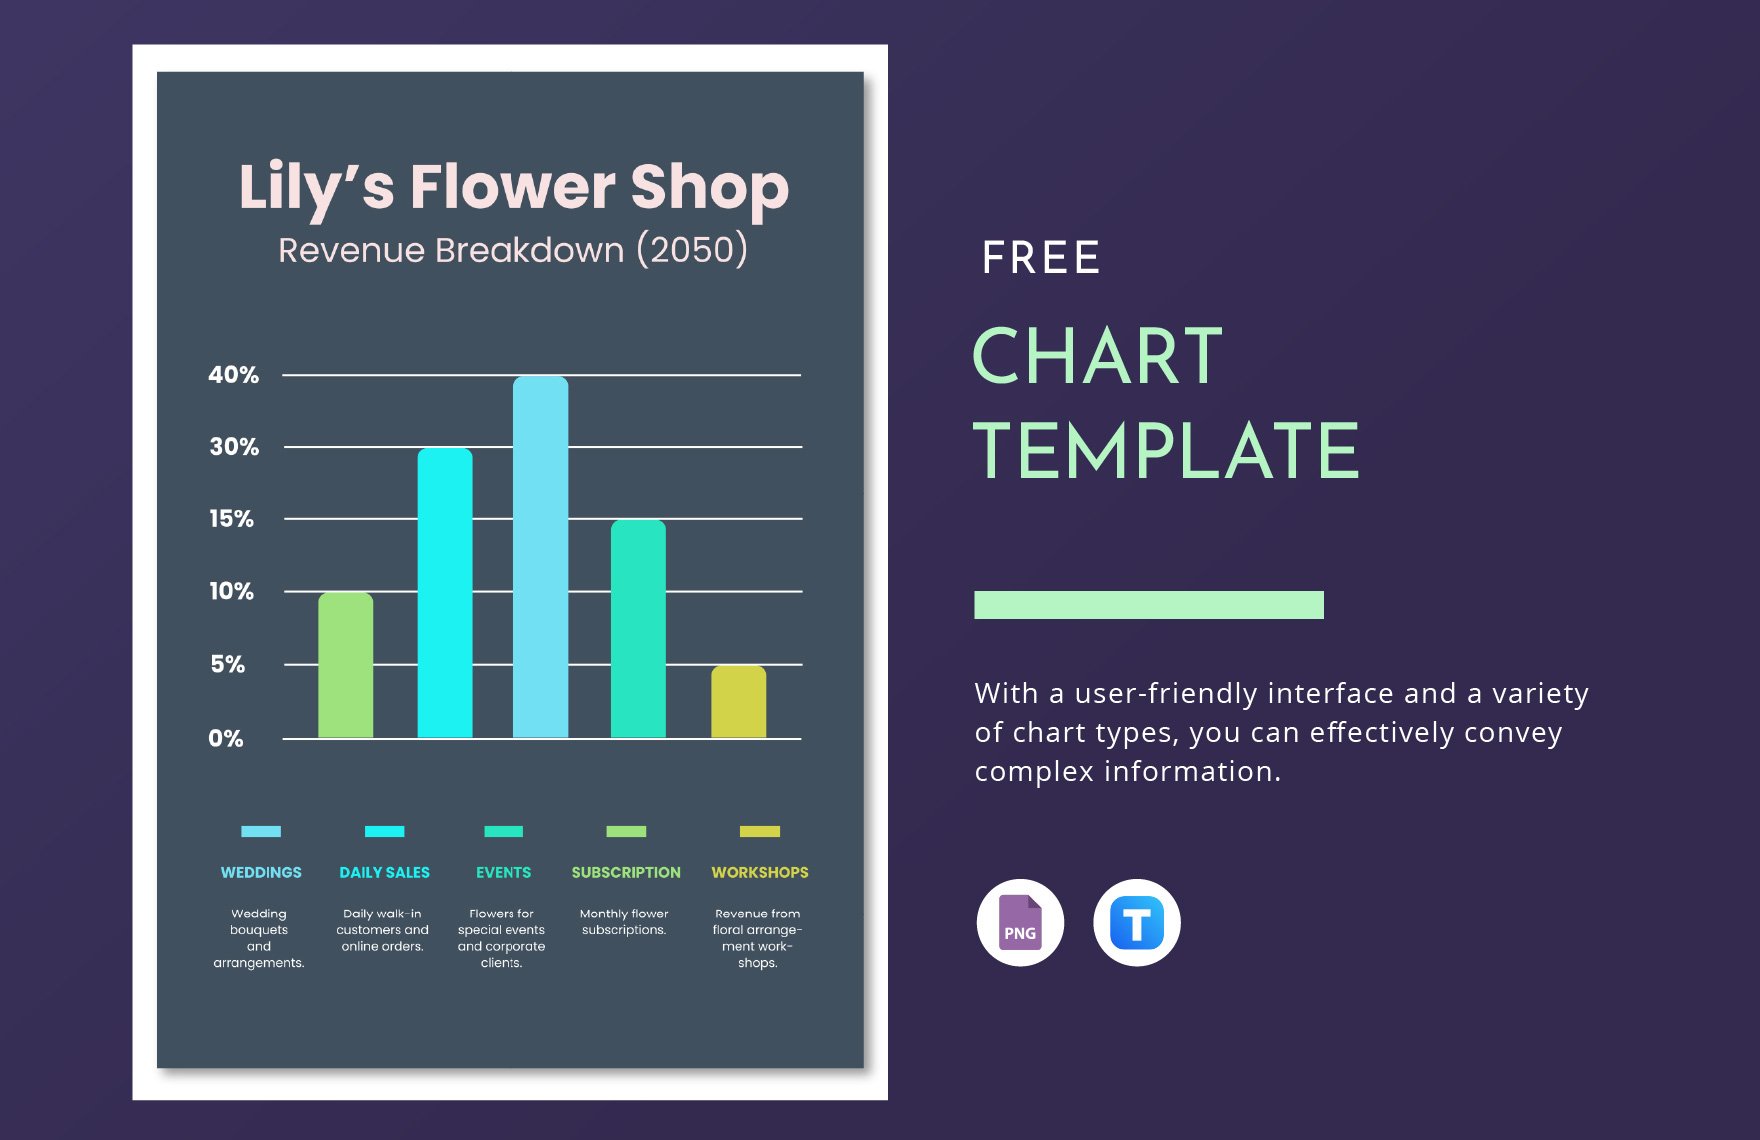 Free Chart Template in PNG